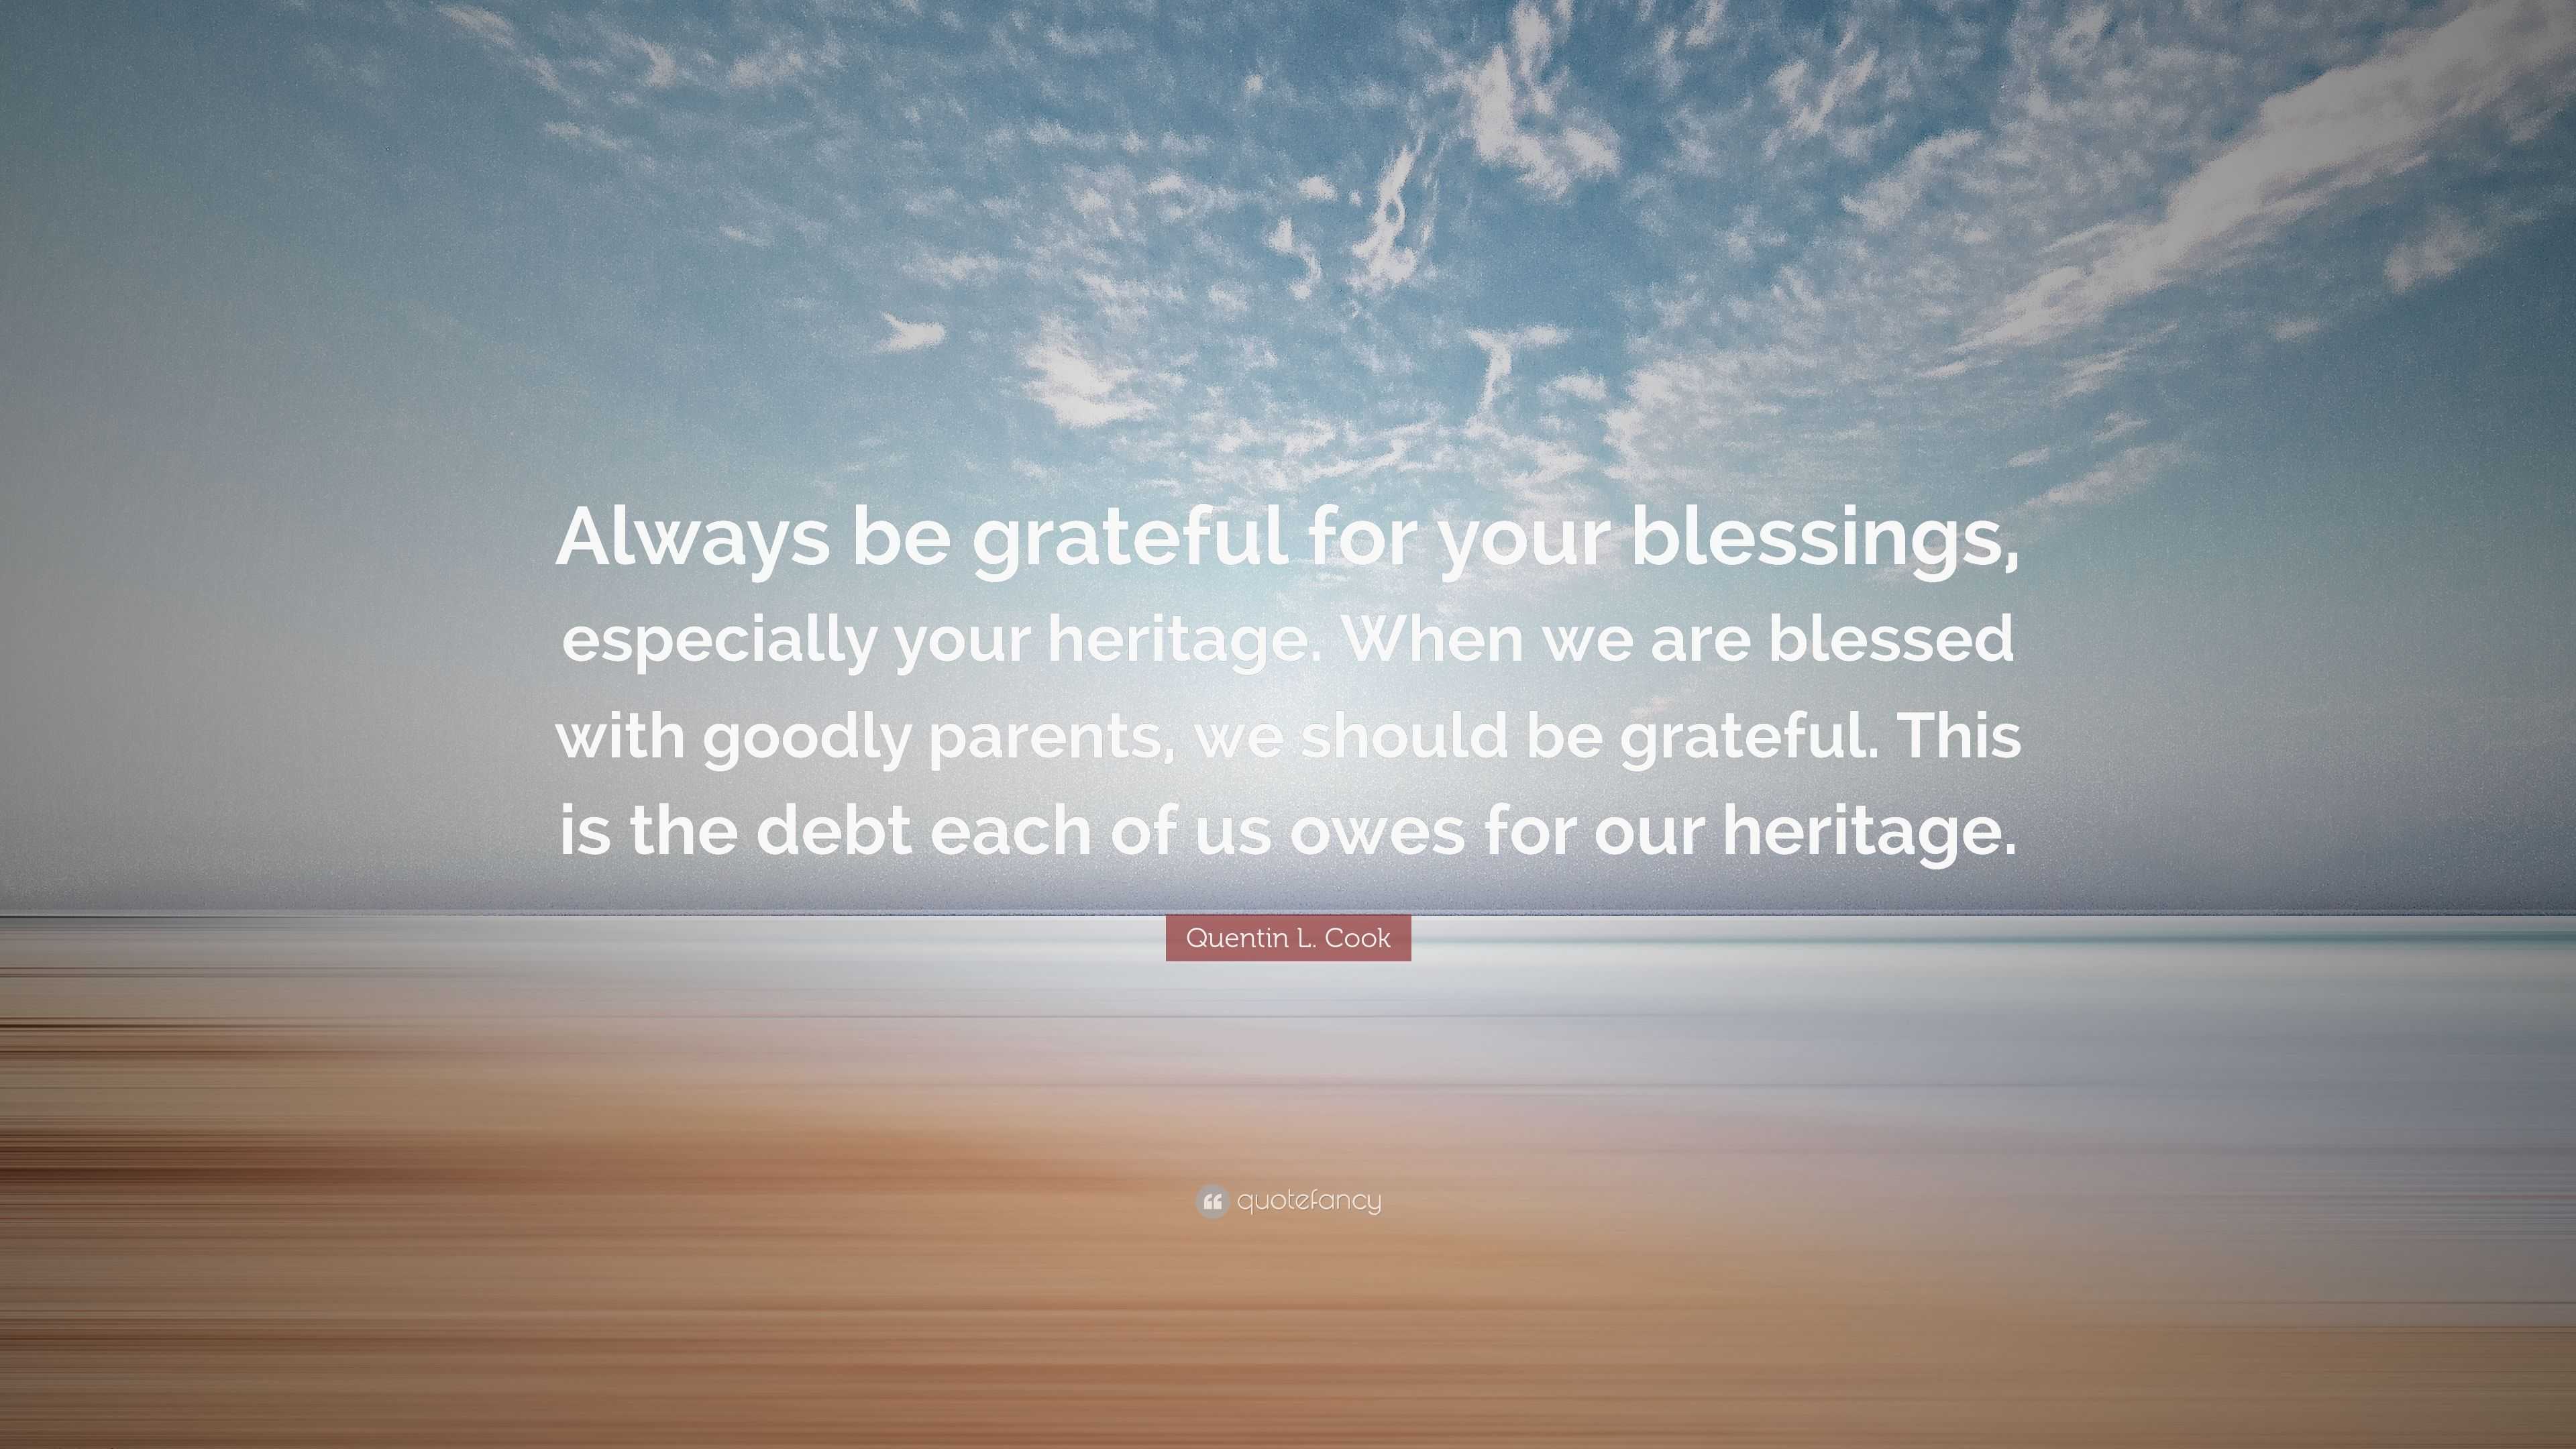 Quentin L. Cook Quote: “Always be grateful for your blessings, especially  your heritage. When we are blessed with goodly parents, we should be g”